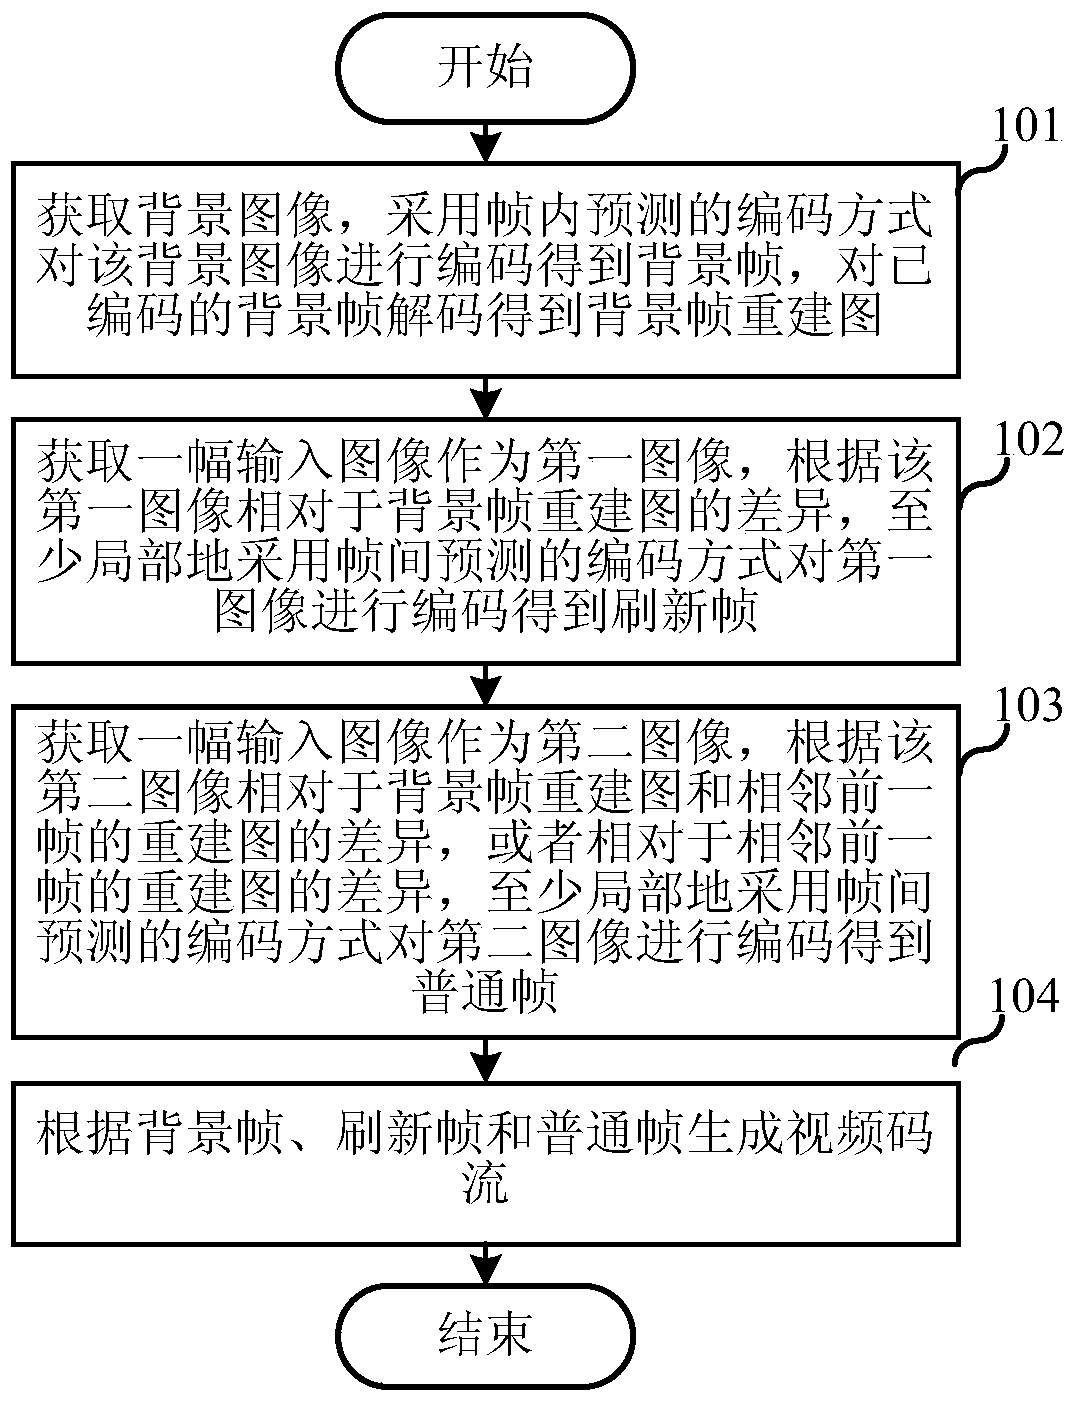 Video encoding and decoding method and device thereof